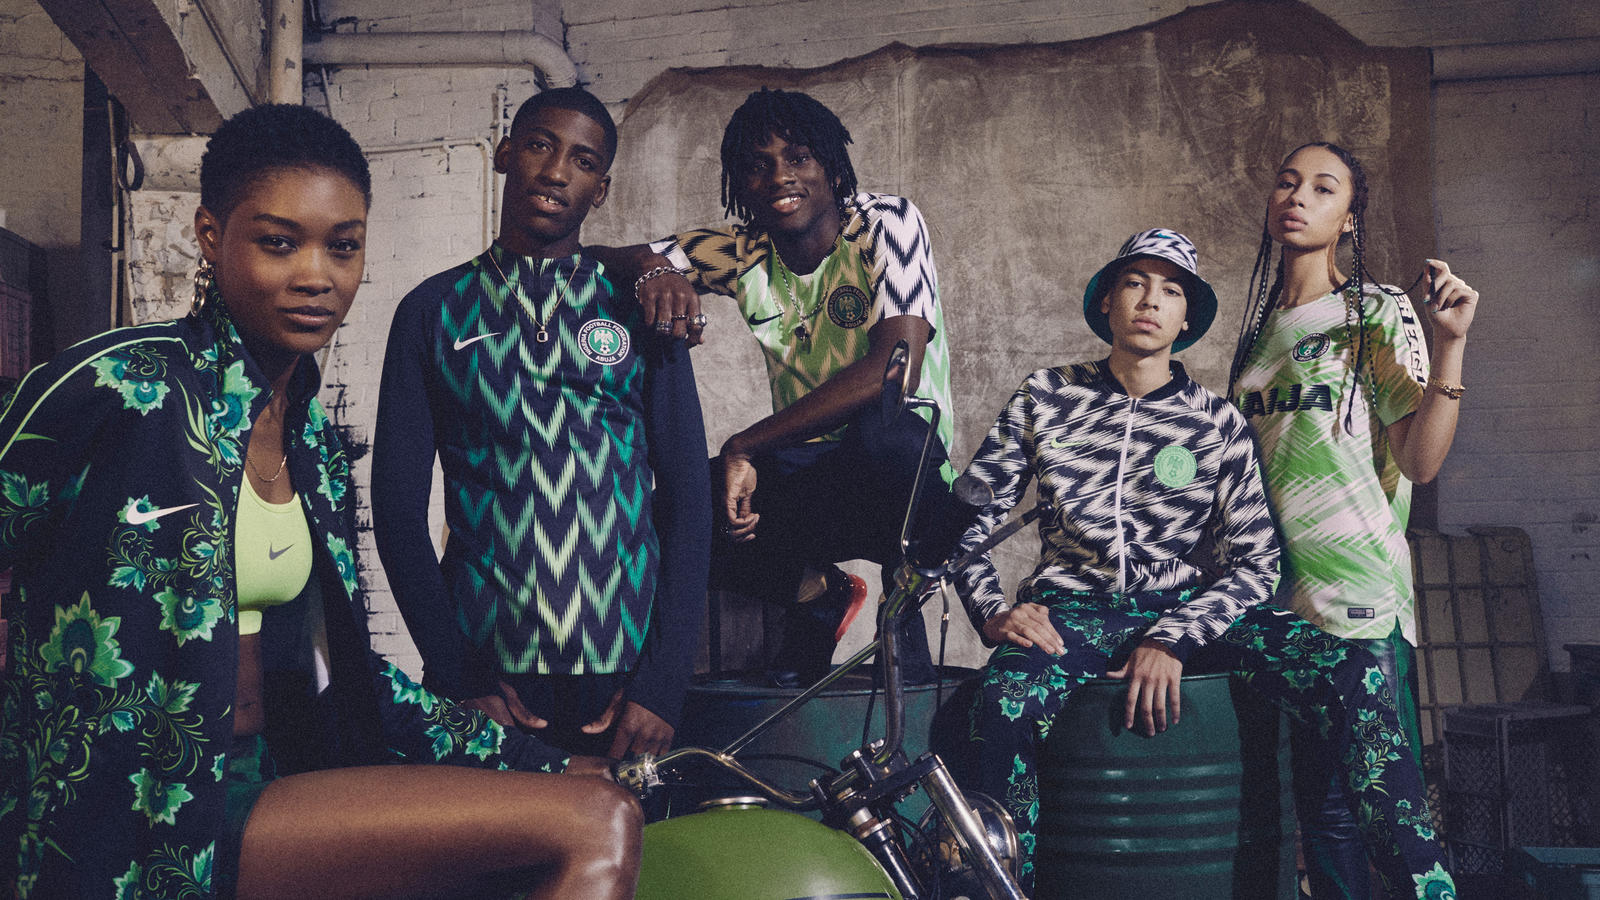 the nigerian football kit become such an immediate cultural touchstone?